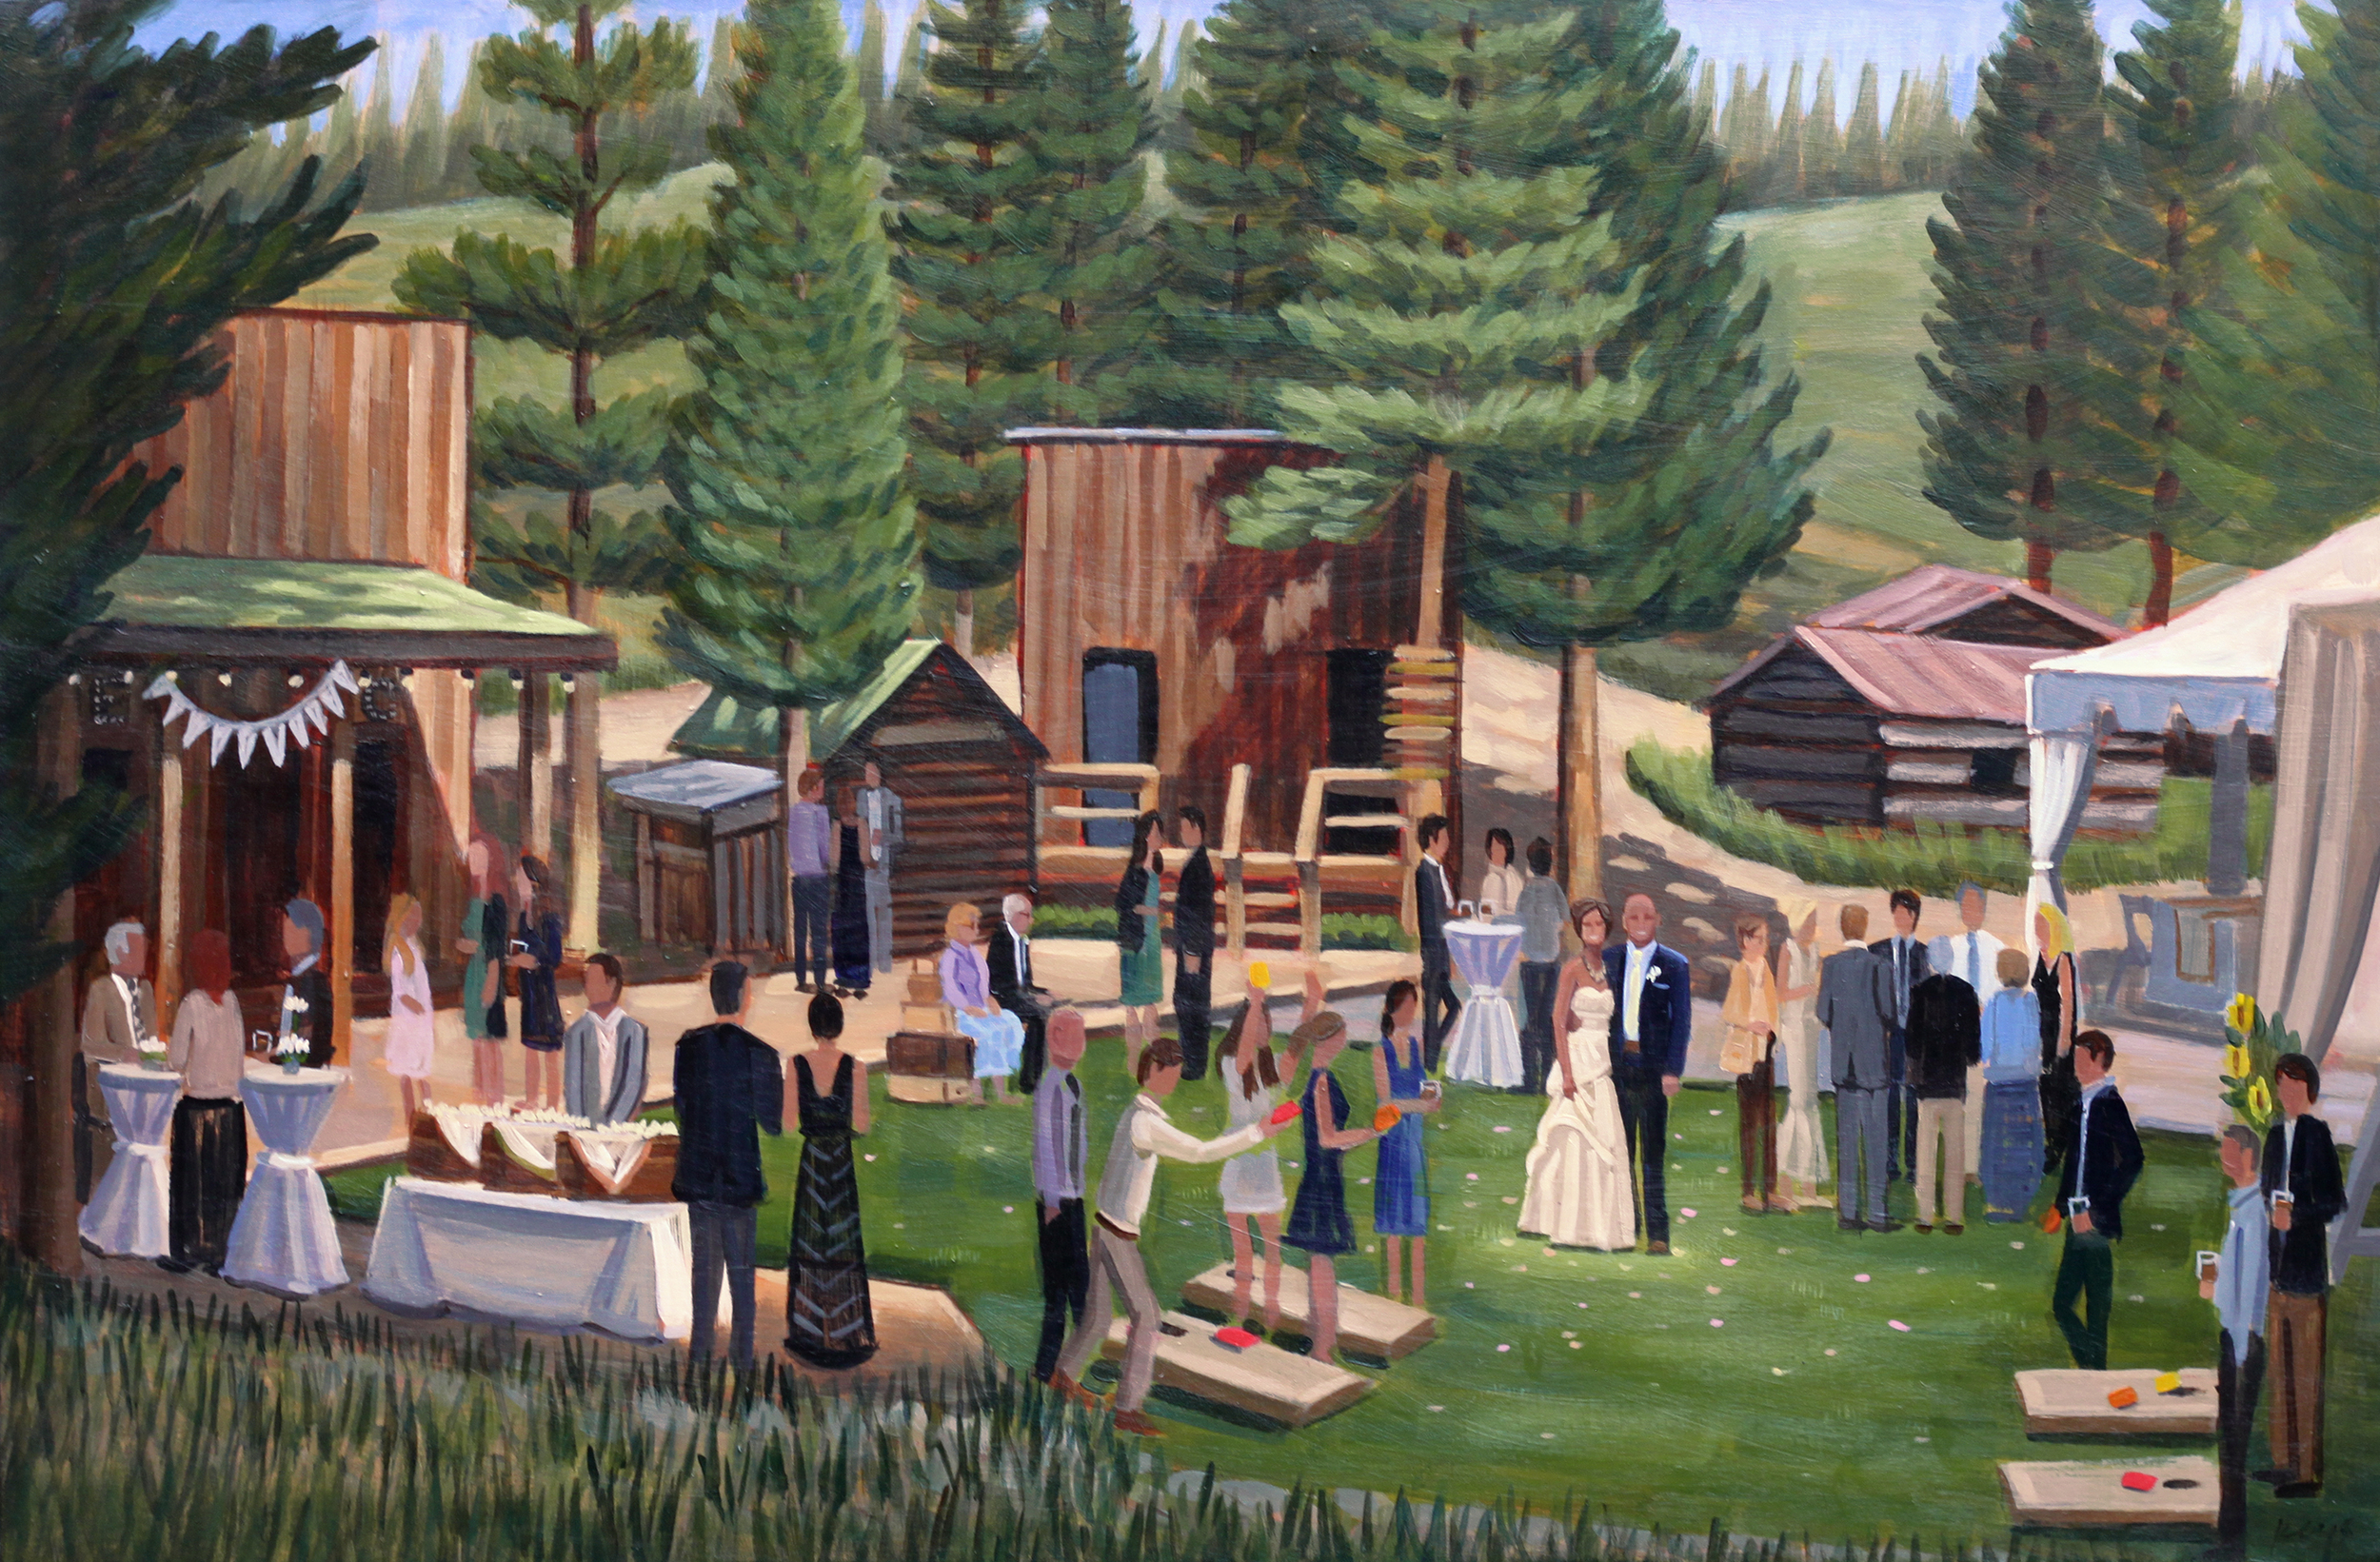 Chris and Erin | 24 x 36 in. | Live Wedding Painting 